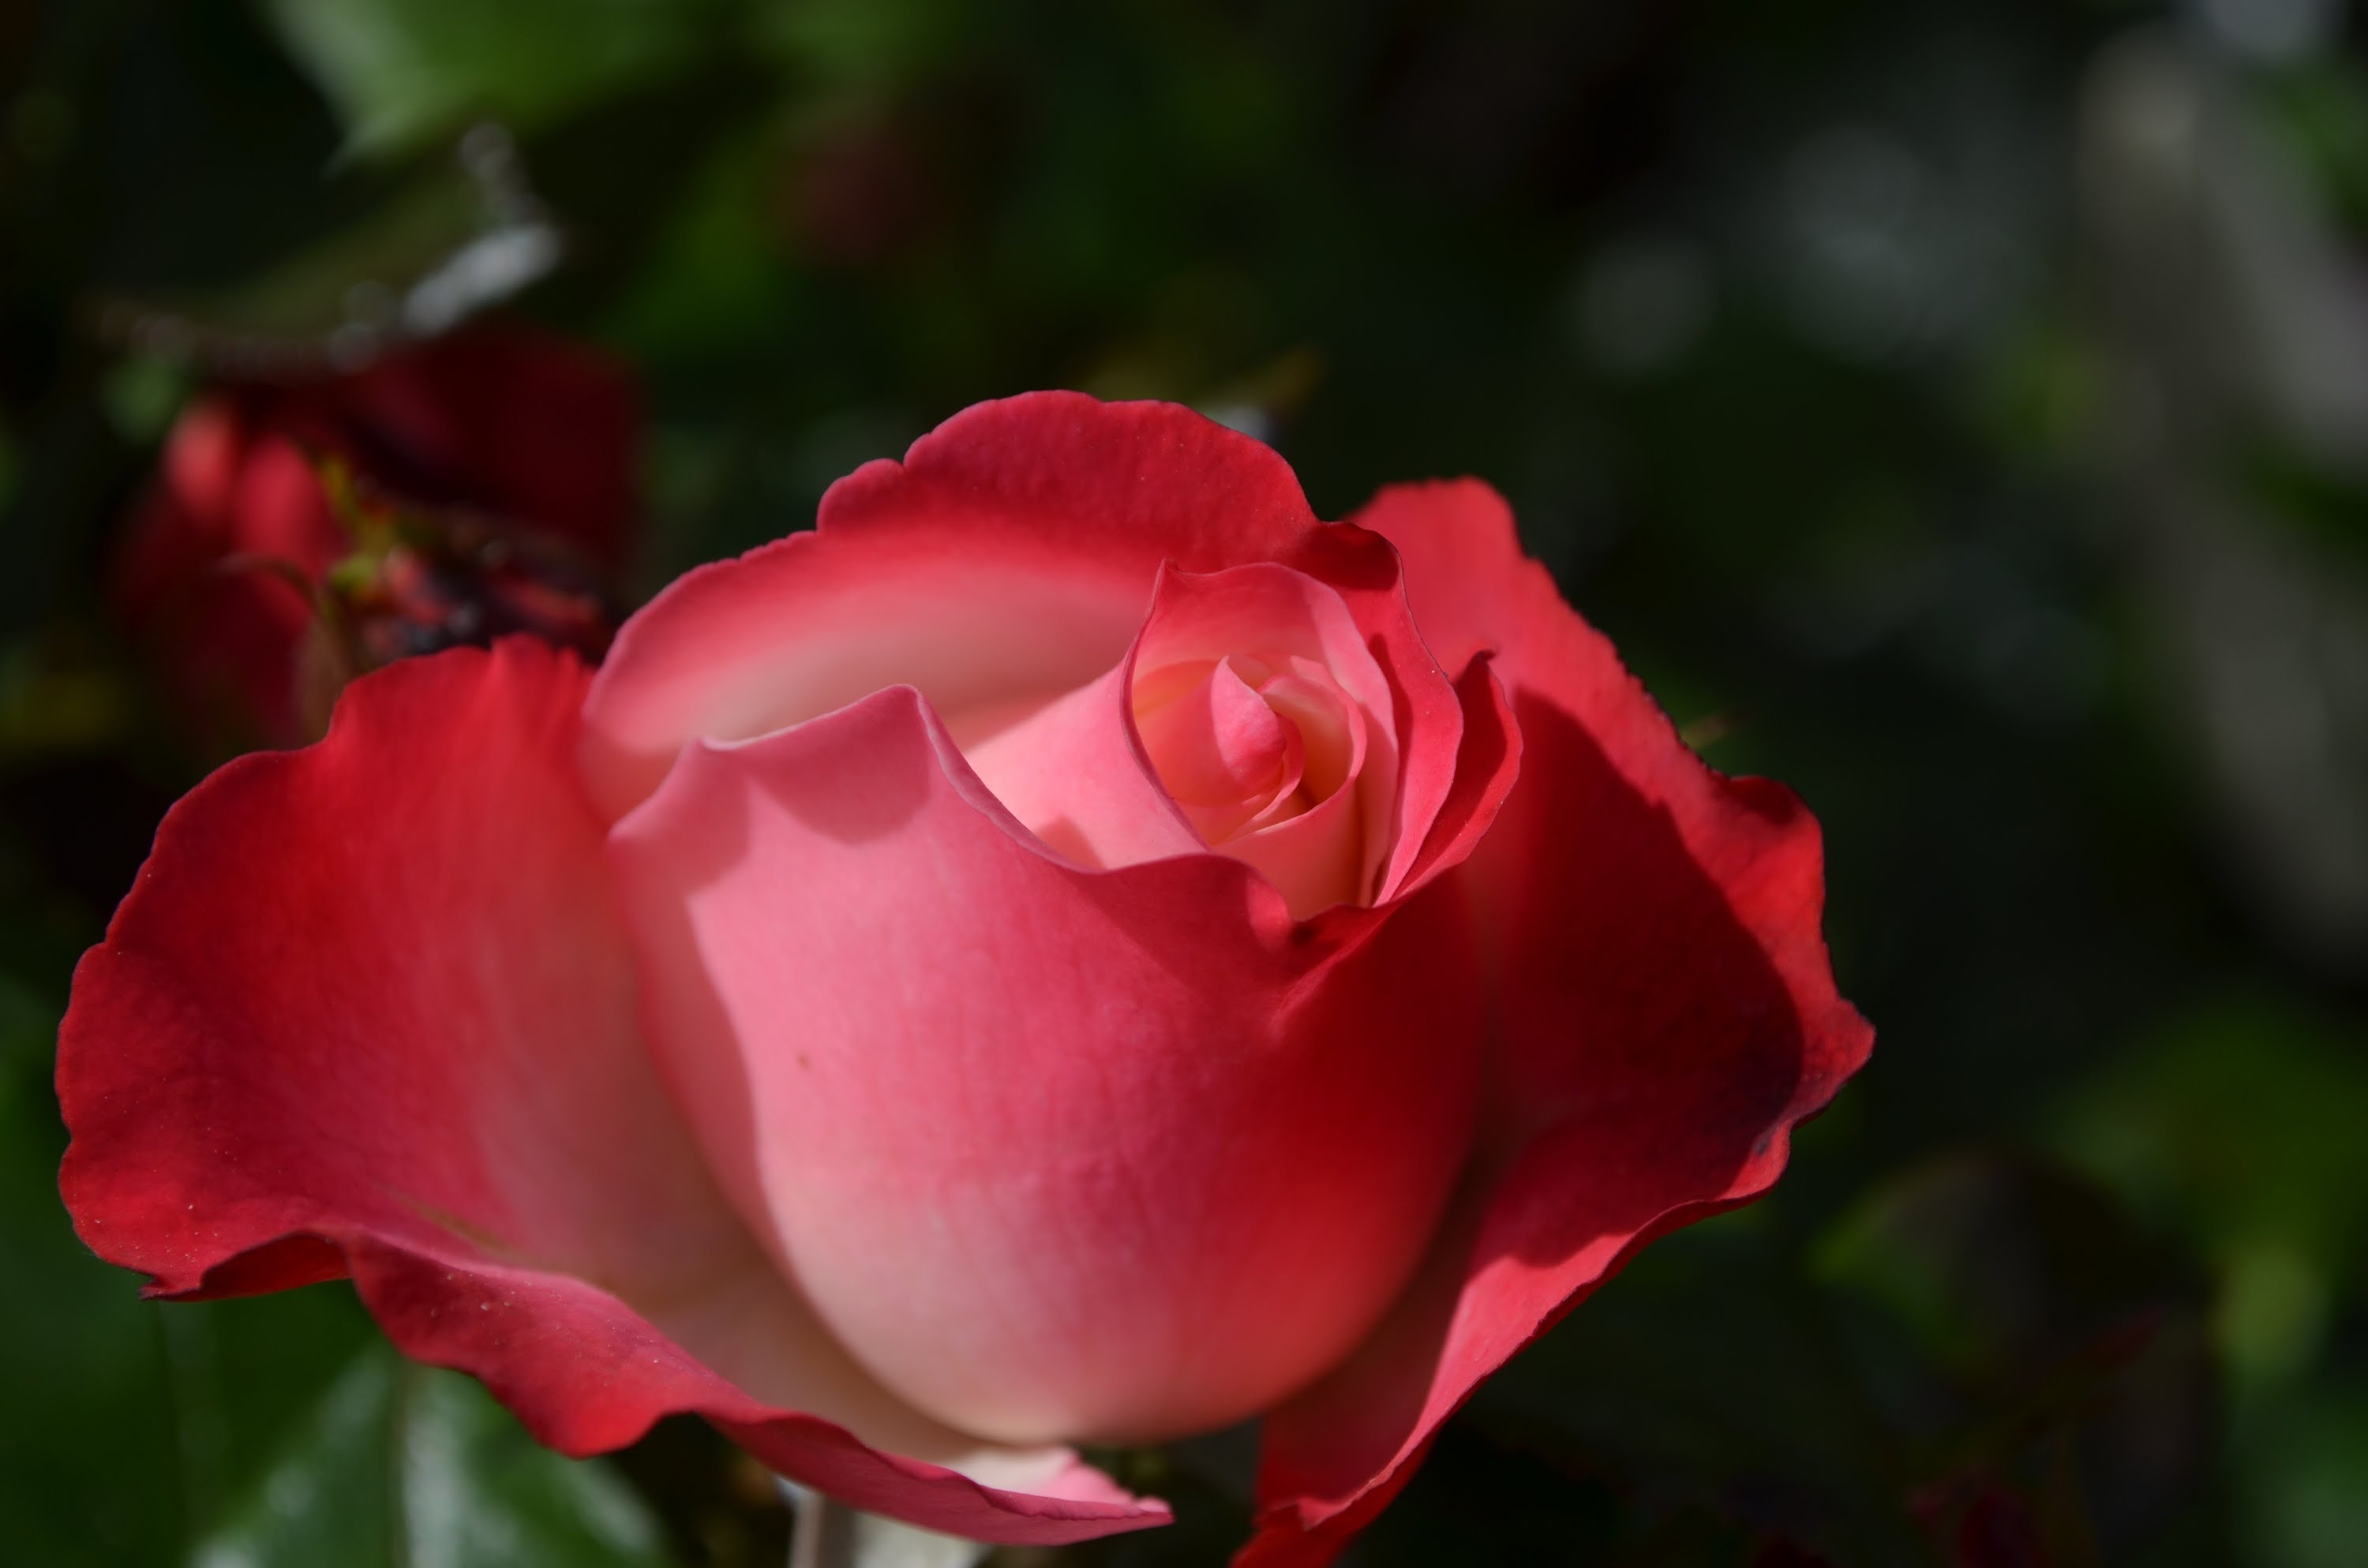 Beautiful Red Rose Flower Collection - HD (720p - 1080p) - YouTube